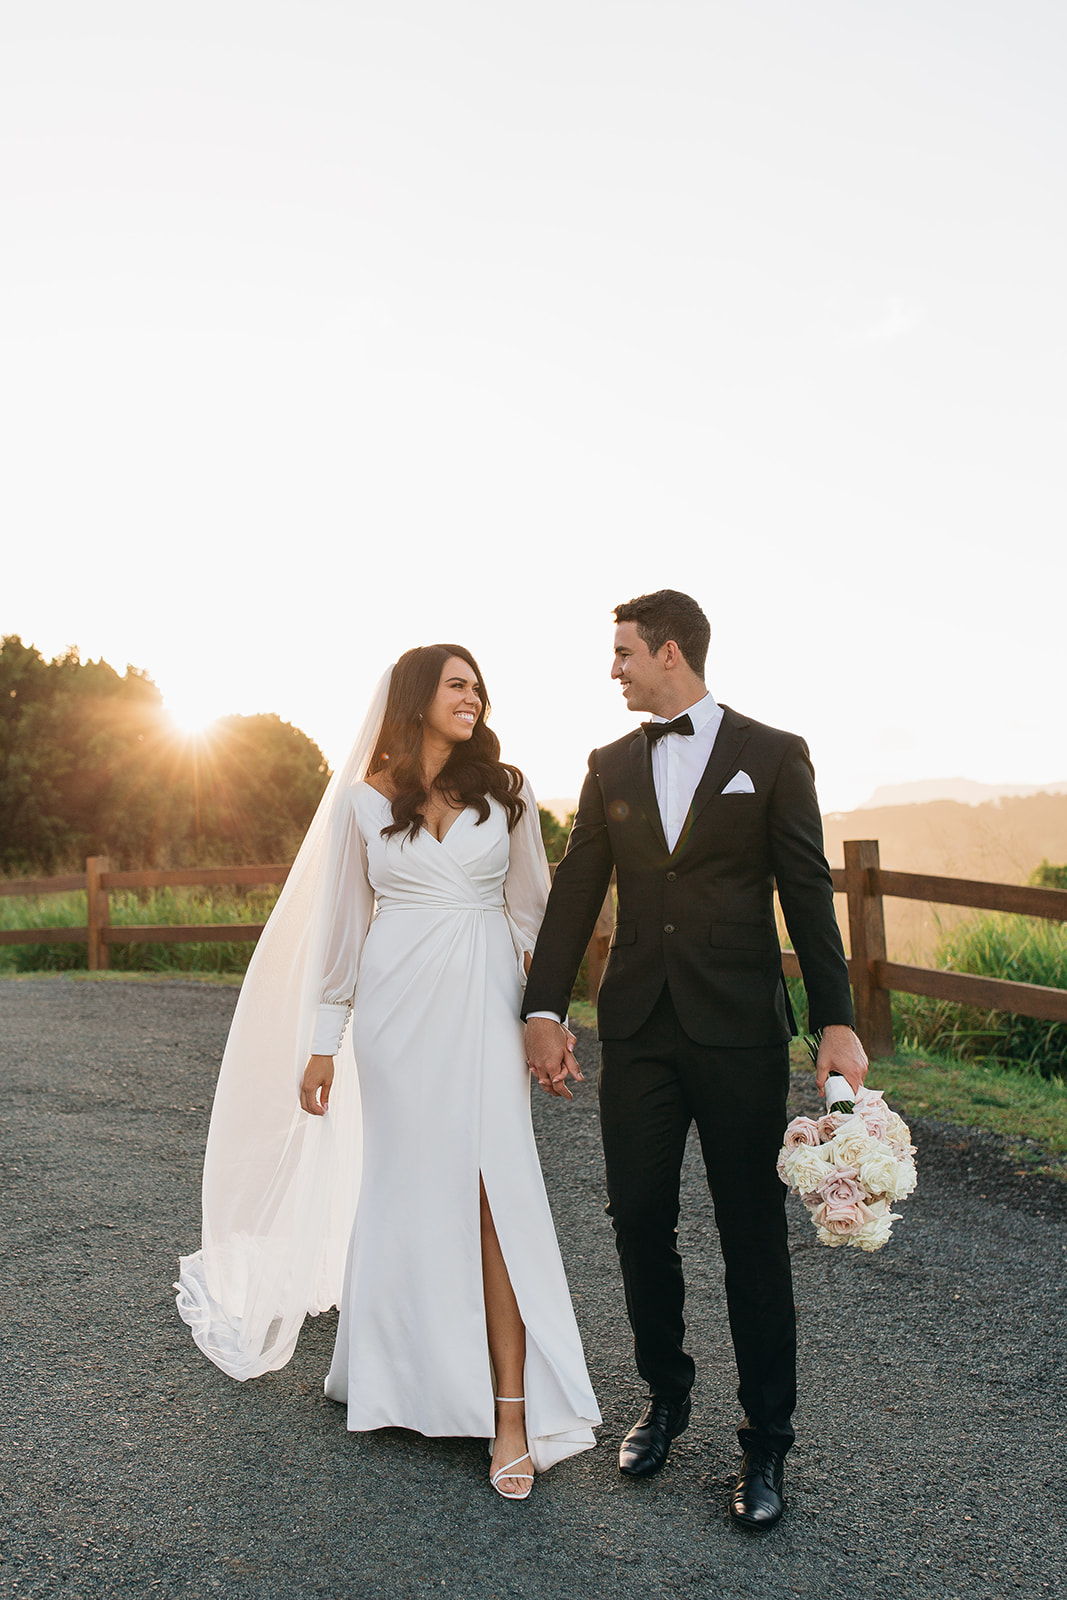 KWH real bride Rebekah and Joel hold hands by the vinyard. She wears the simple Nikki wedding dress with high leg split and long sheer sleeves.